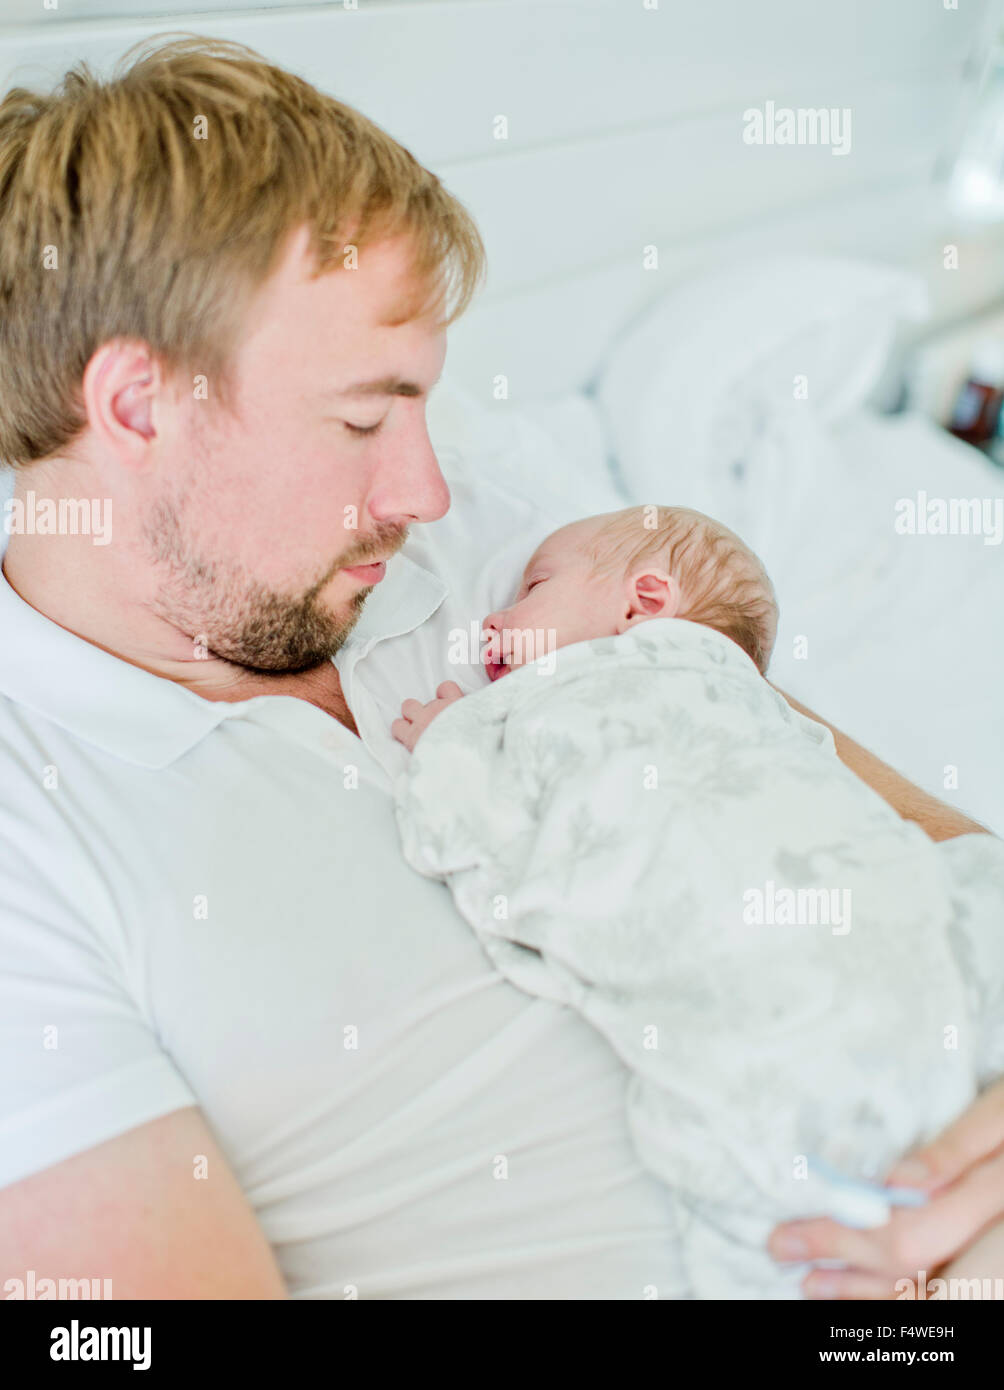 Mid-adult man holding baby boy (0-1 months) in his arms Stock Photo